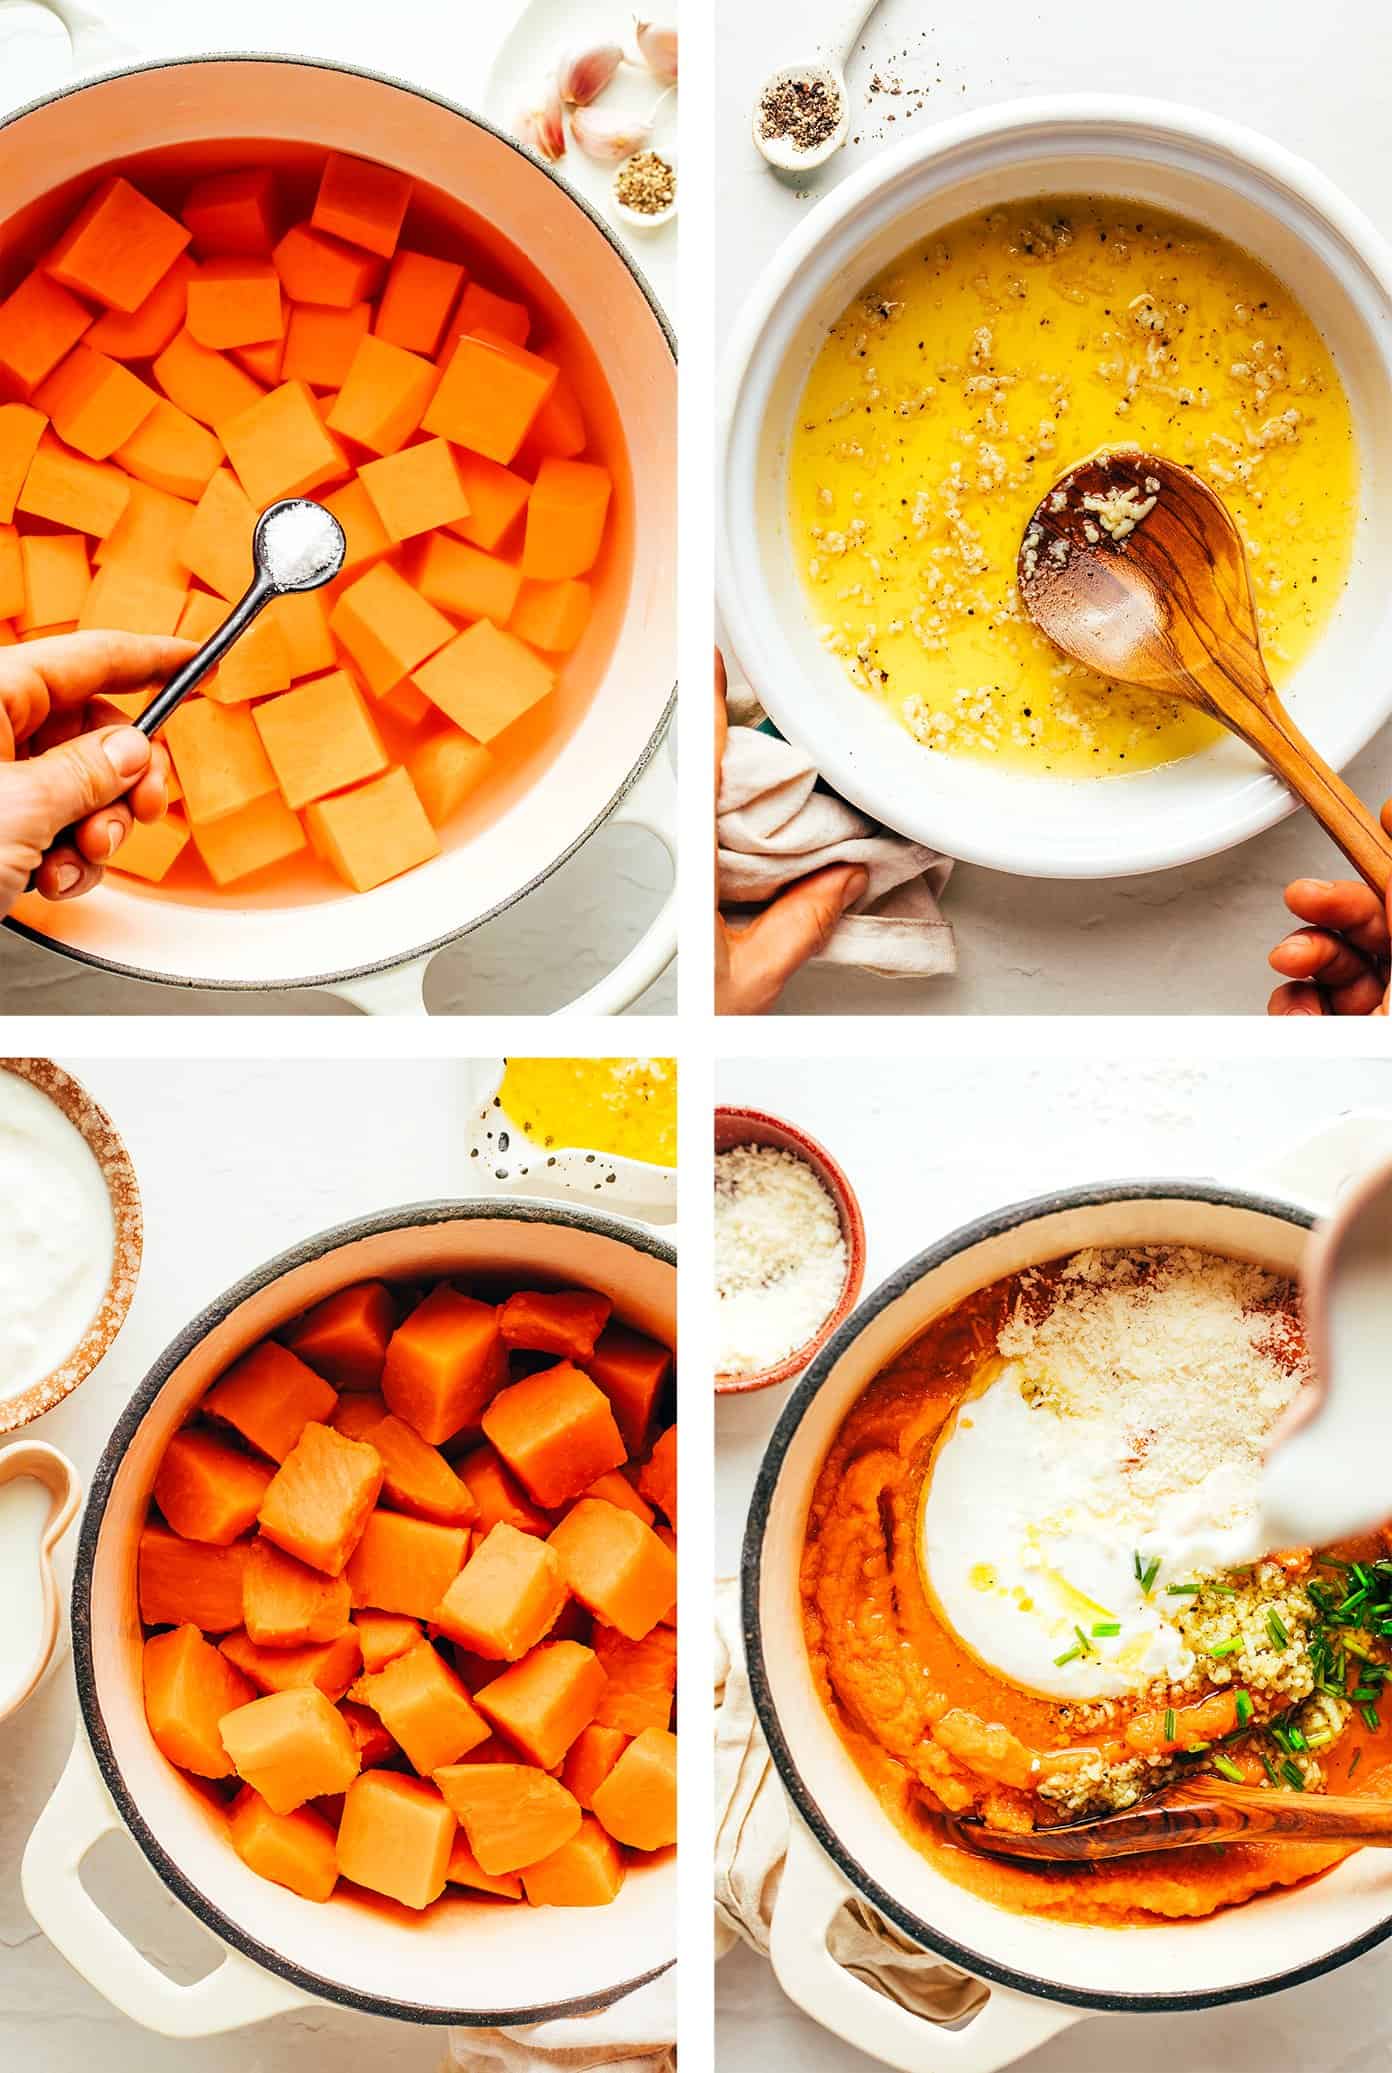 Step by step photos detailing how to make mashed sweet potatoes